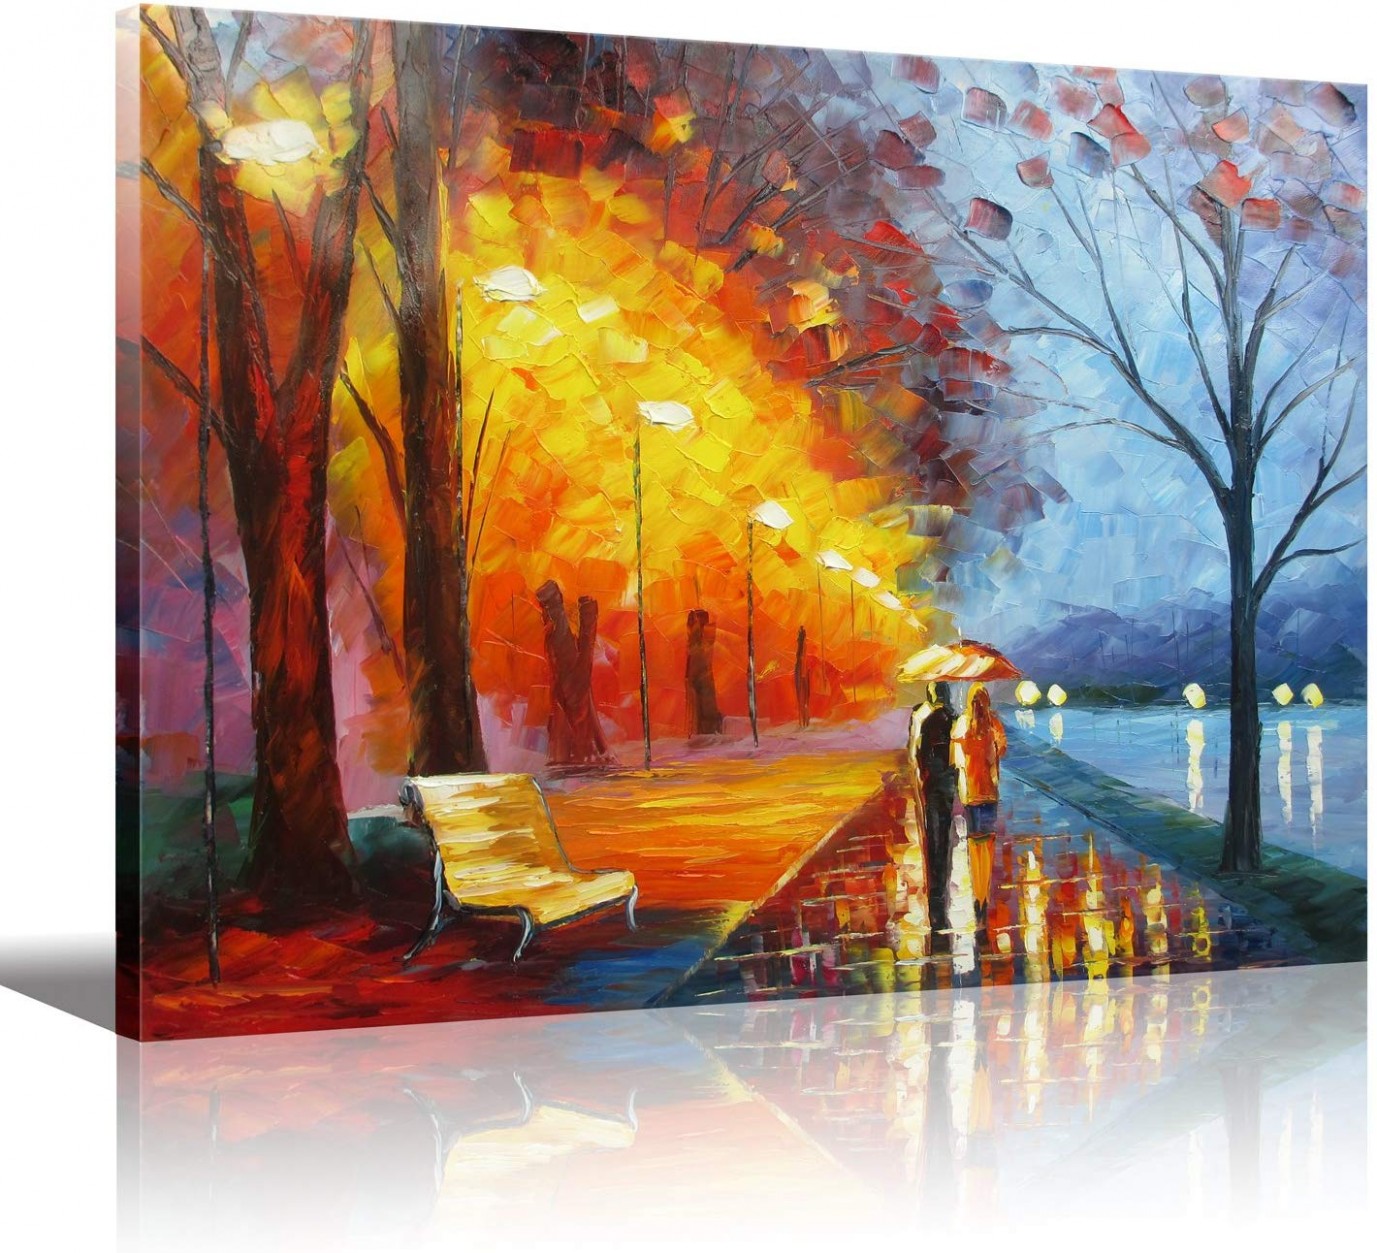 Wooden Framed Hd Romantic Painting"lovers Walk On The Side Of The Lake" Prints On Canvas,palette Knife Stretched Ready To Hang Blue Red Yellow Etc ..